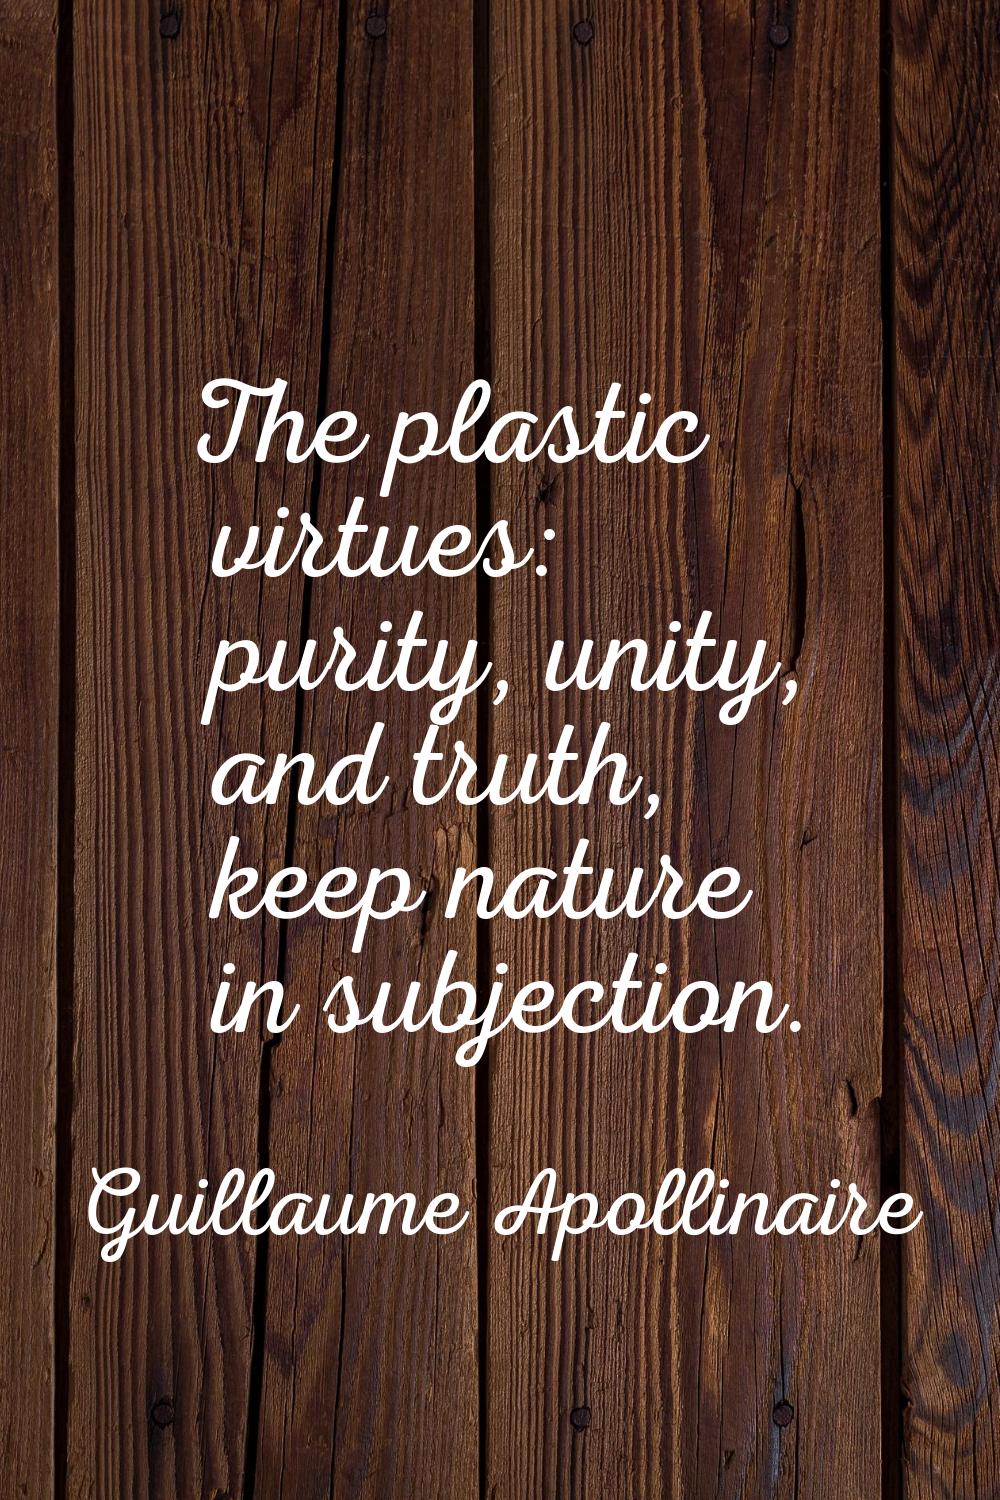 The plastic virtues: purity, unity, and truth, keep nature in subjection.